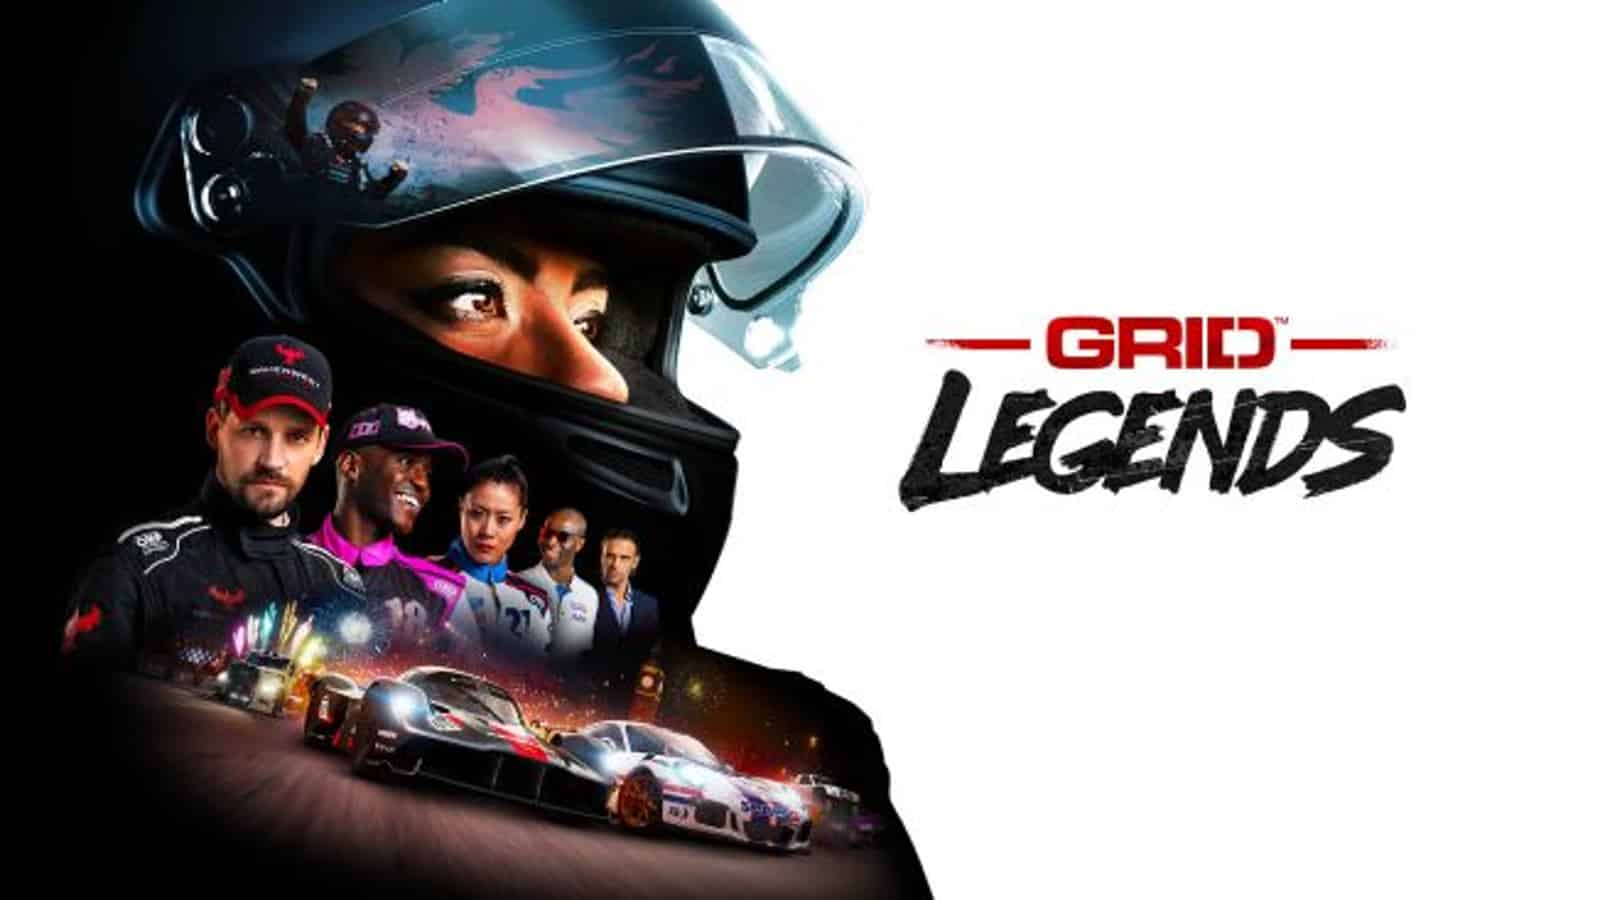 Grid Legends keyart promoting the game's February 25 release date